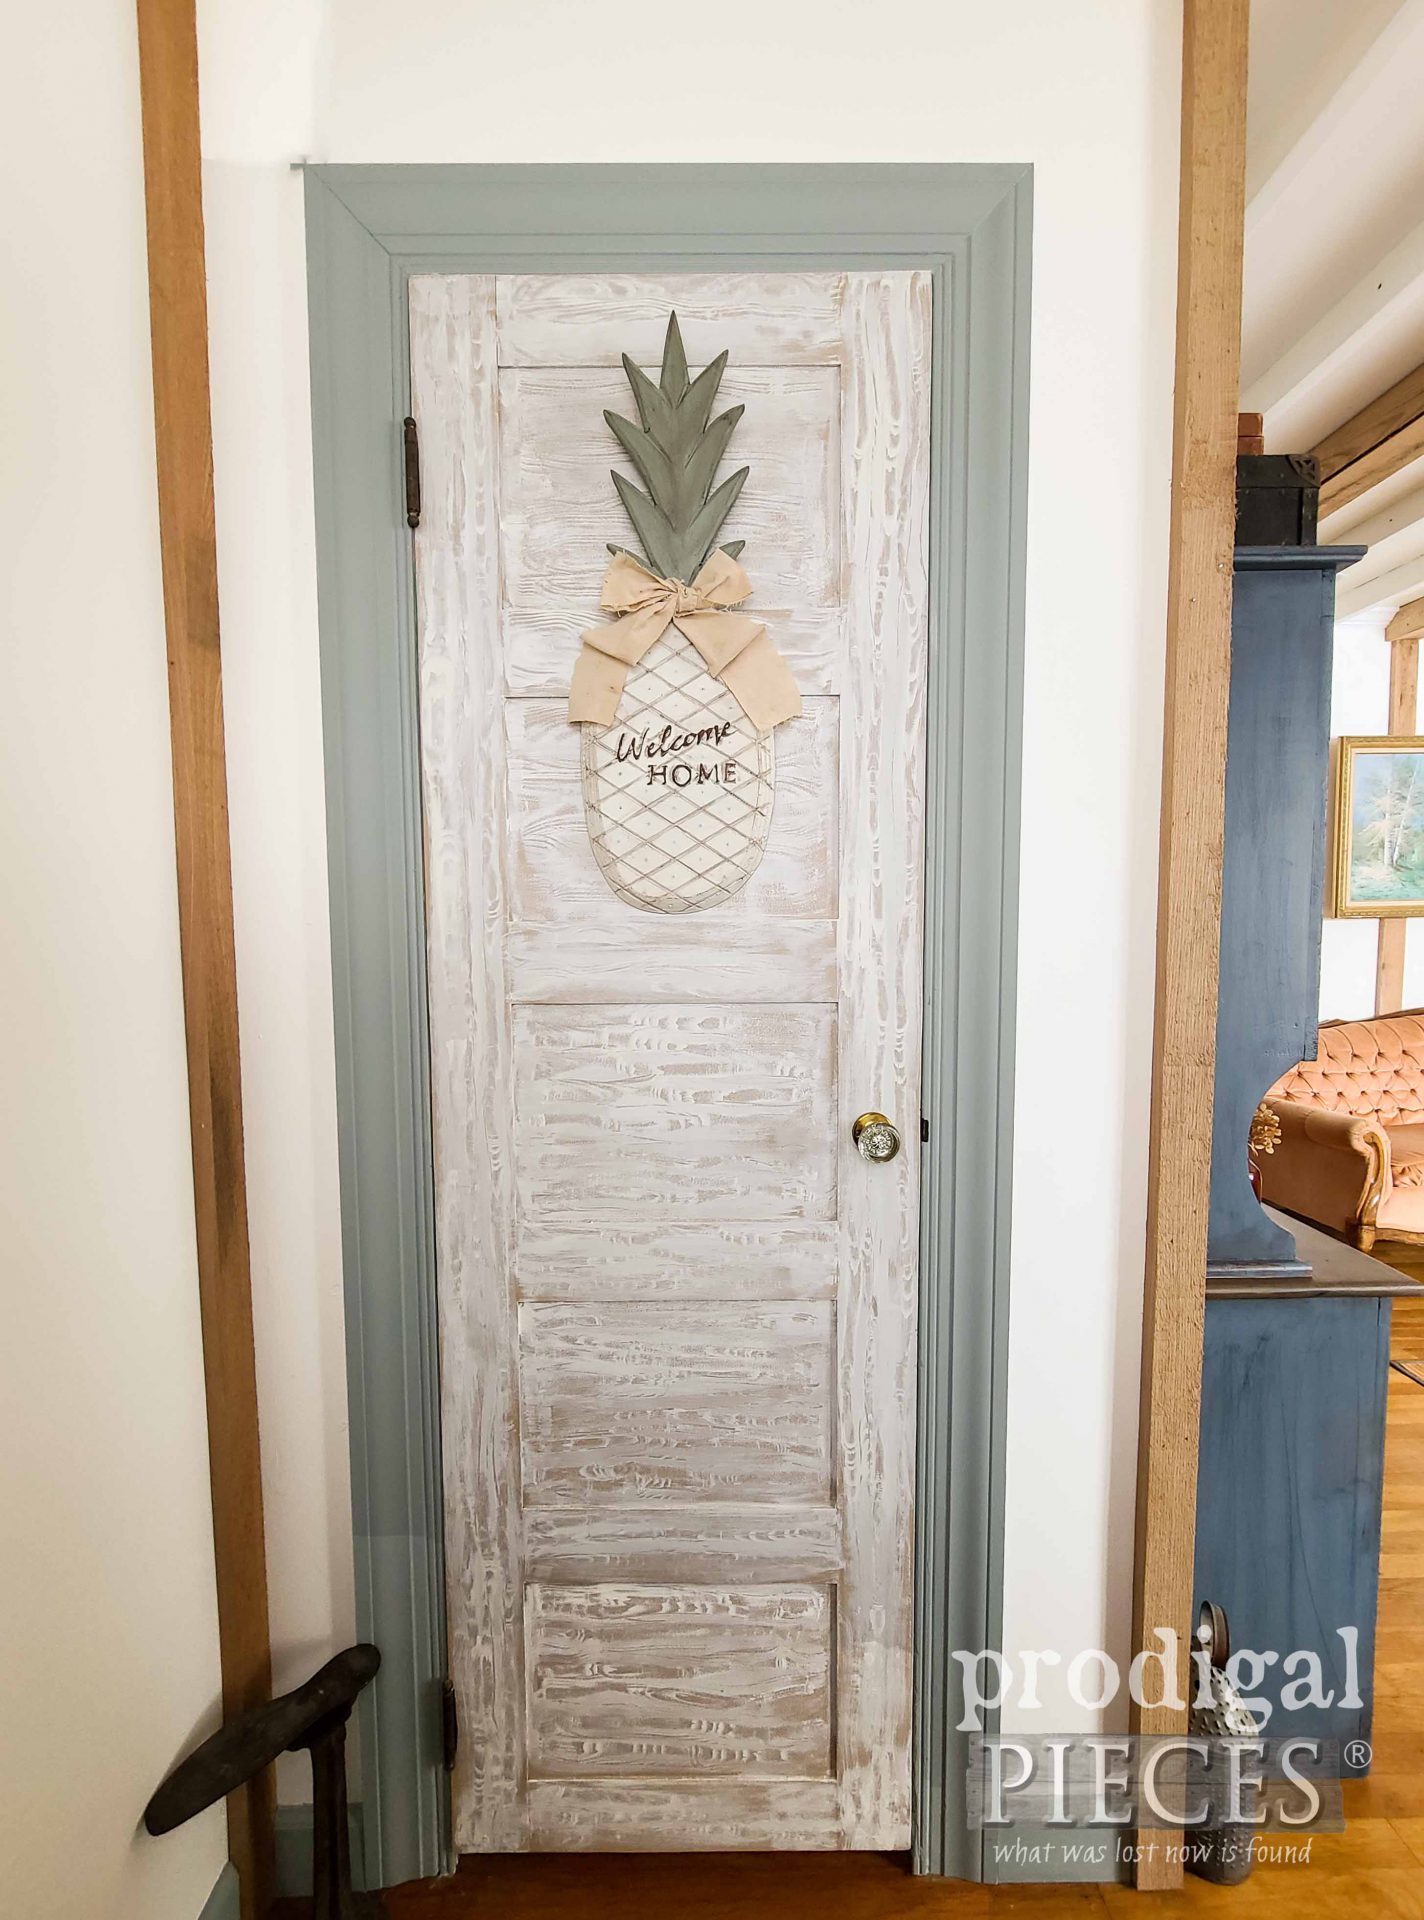 Farmhouse Pineapple Welcome Sign for Home Decor by Larissa of Prodigal Pieces | prodigalpieces.com #prodigalpieces #farmhouse #home #homedecor